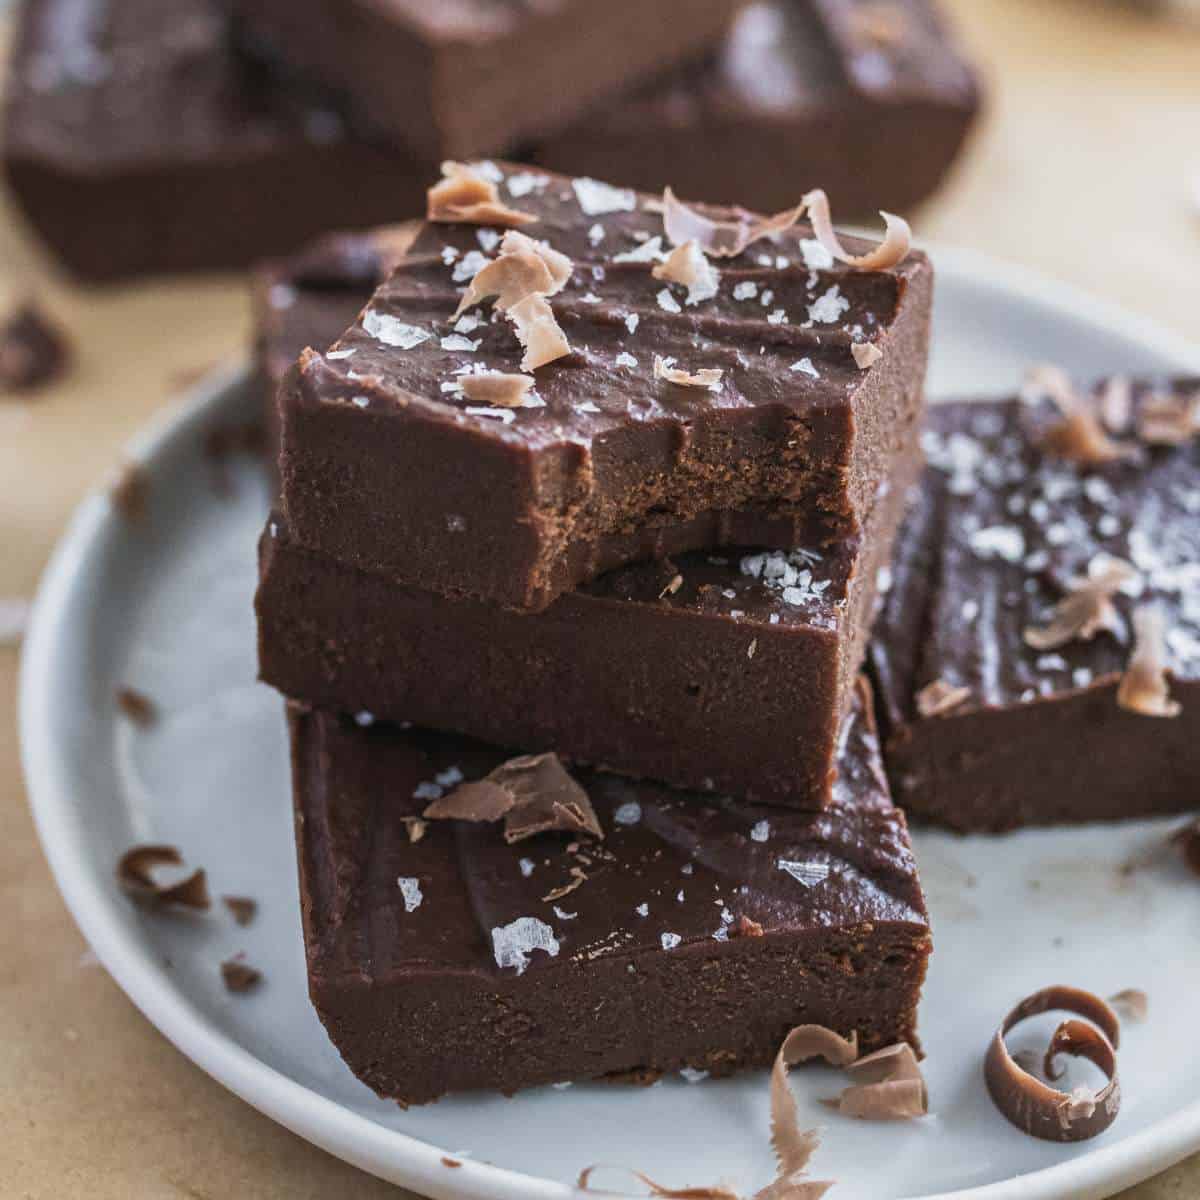 3 healthy fudge bars stacked on top of each other on a dessert dish with chocolate shavings and flaky salt sprinkled around.